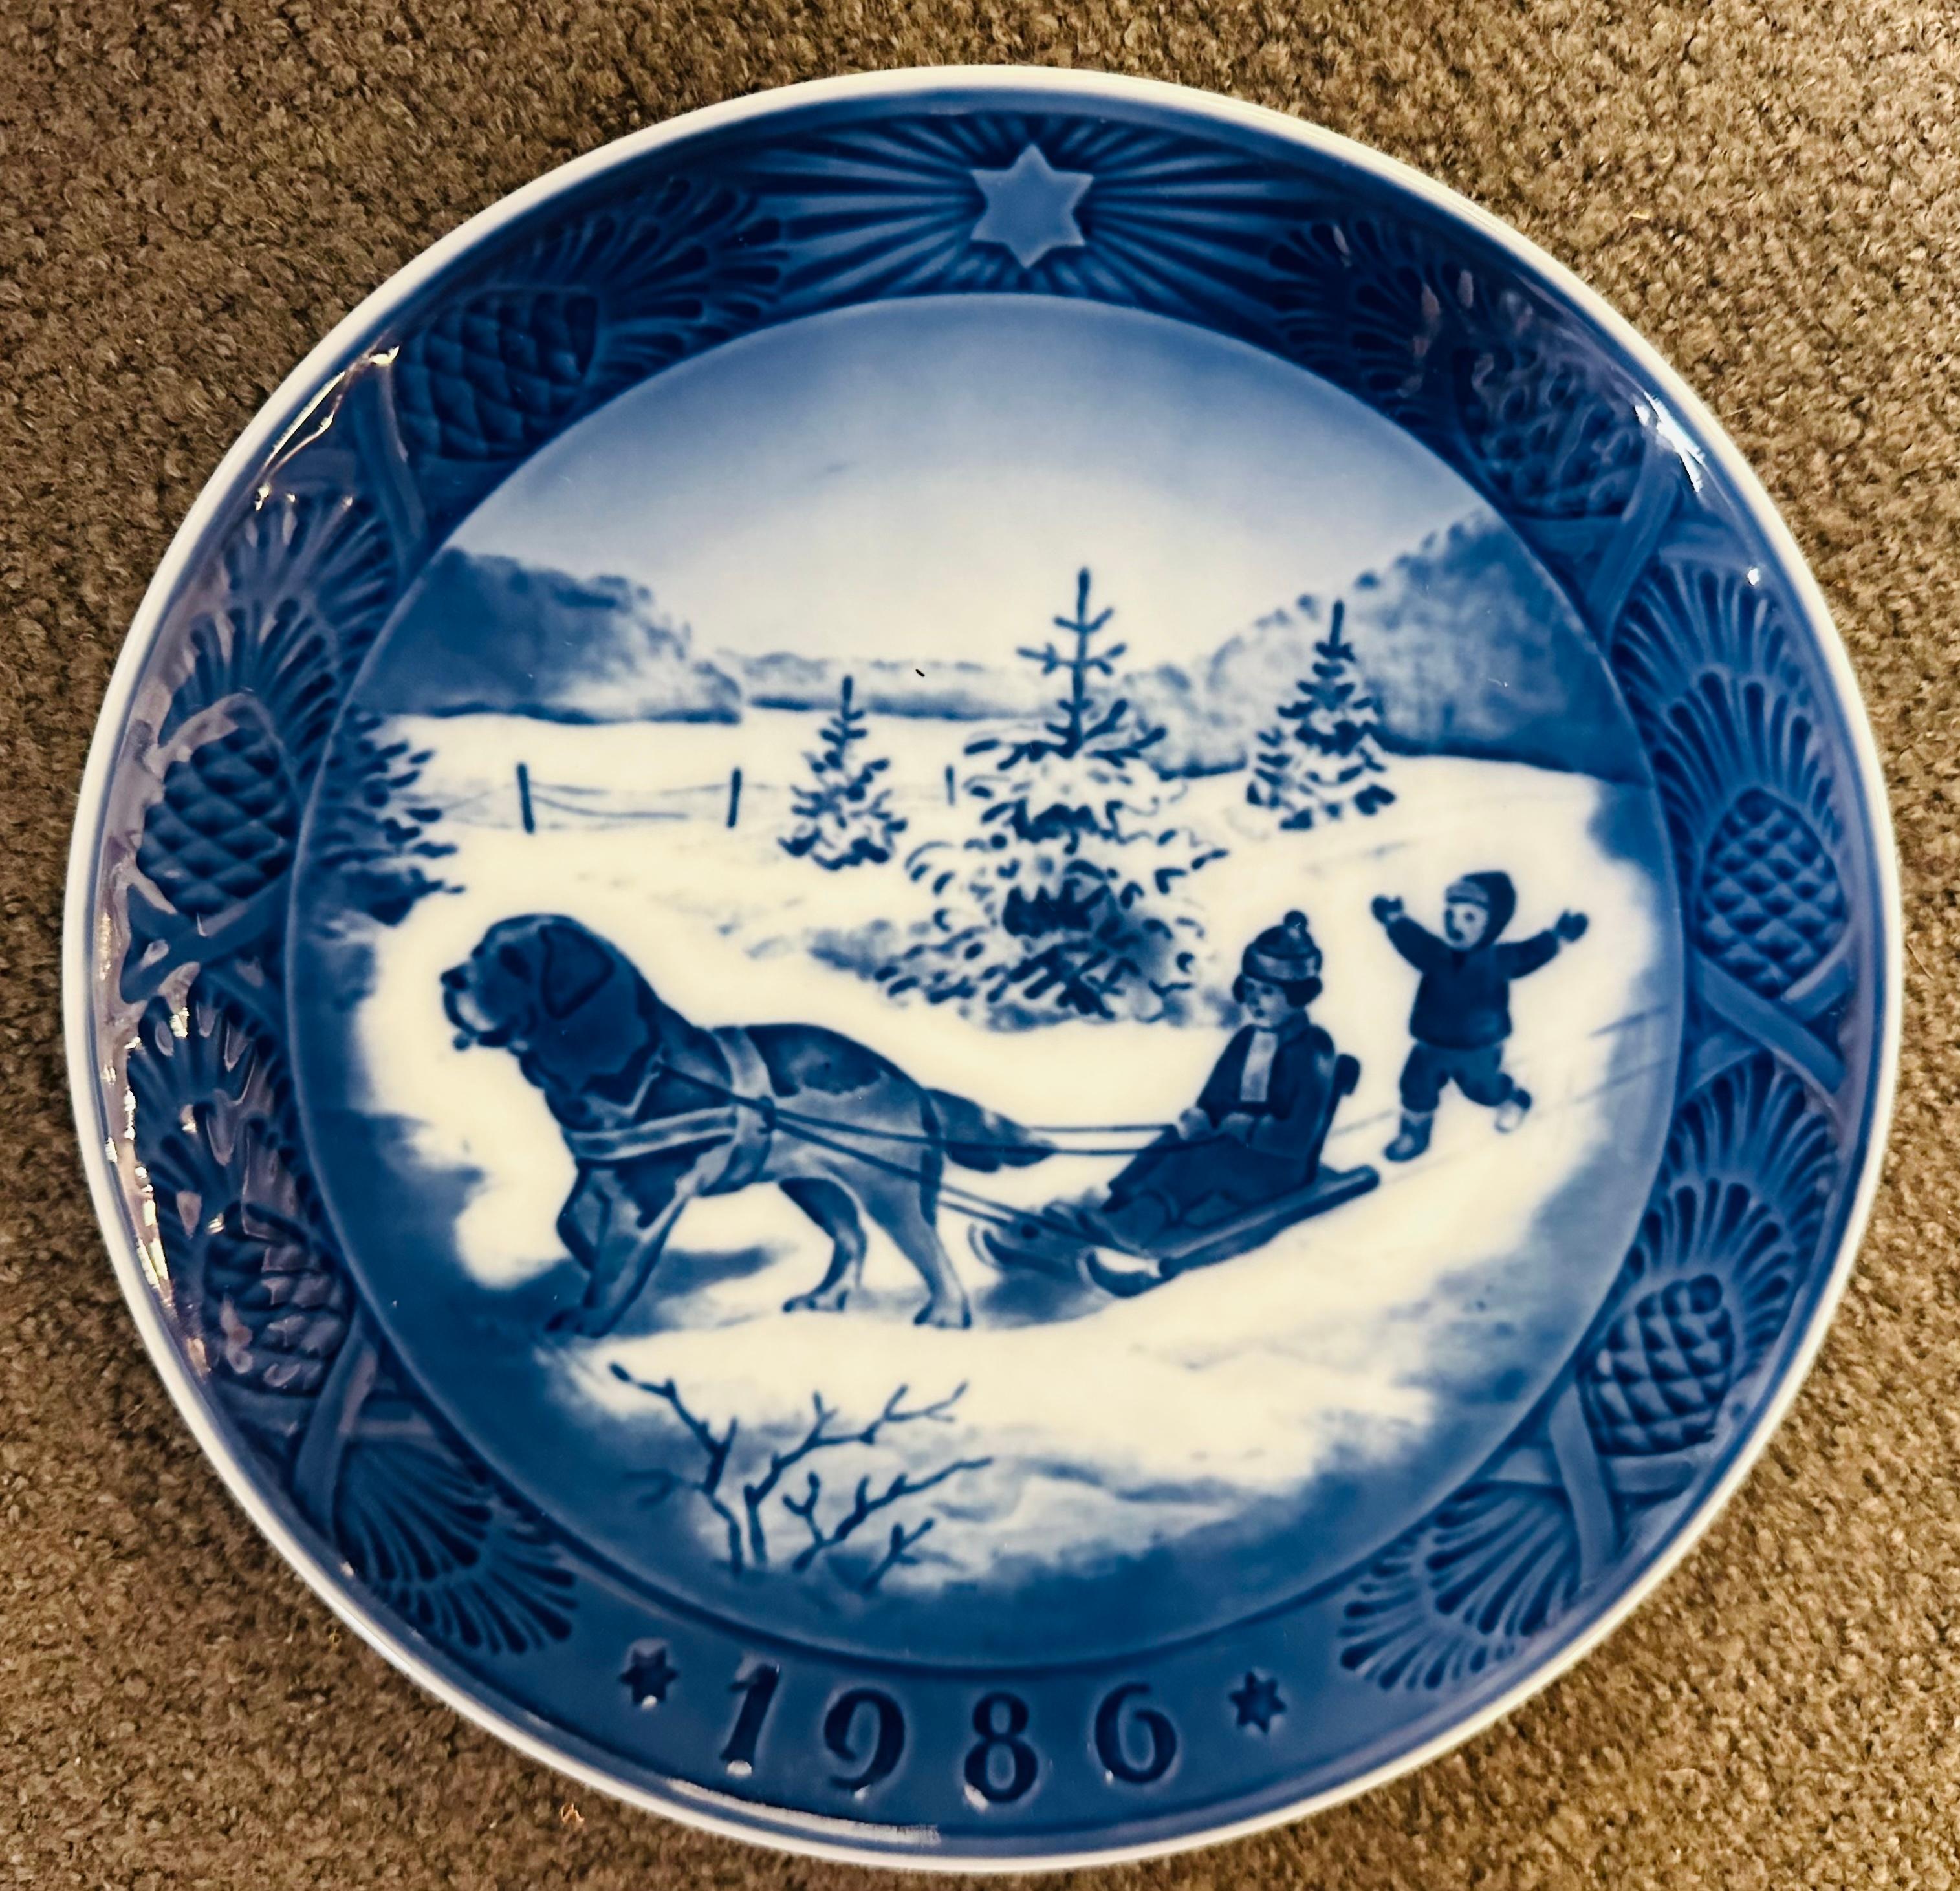 1986 Danish Royal Copenhagen Christmas plate entitled Christmas Holidays (Juleferie). Designed by Sven Vestergaard depicting a scene showing children playing in the snow with the older child sitting on a sledge being pulled by a Saint Bernard dog